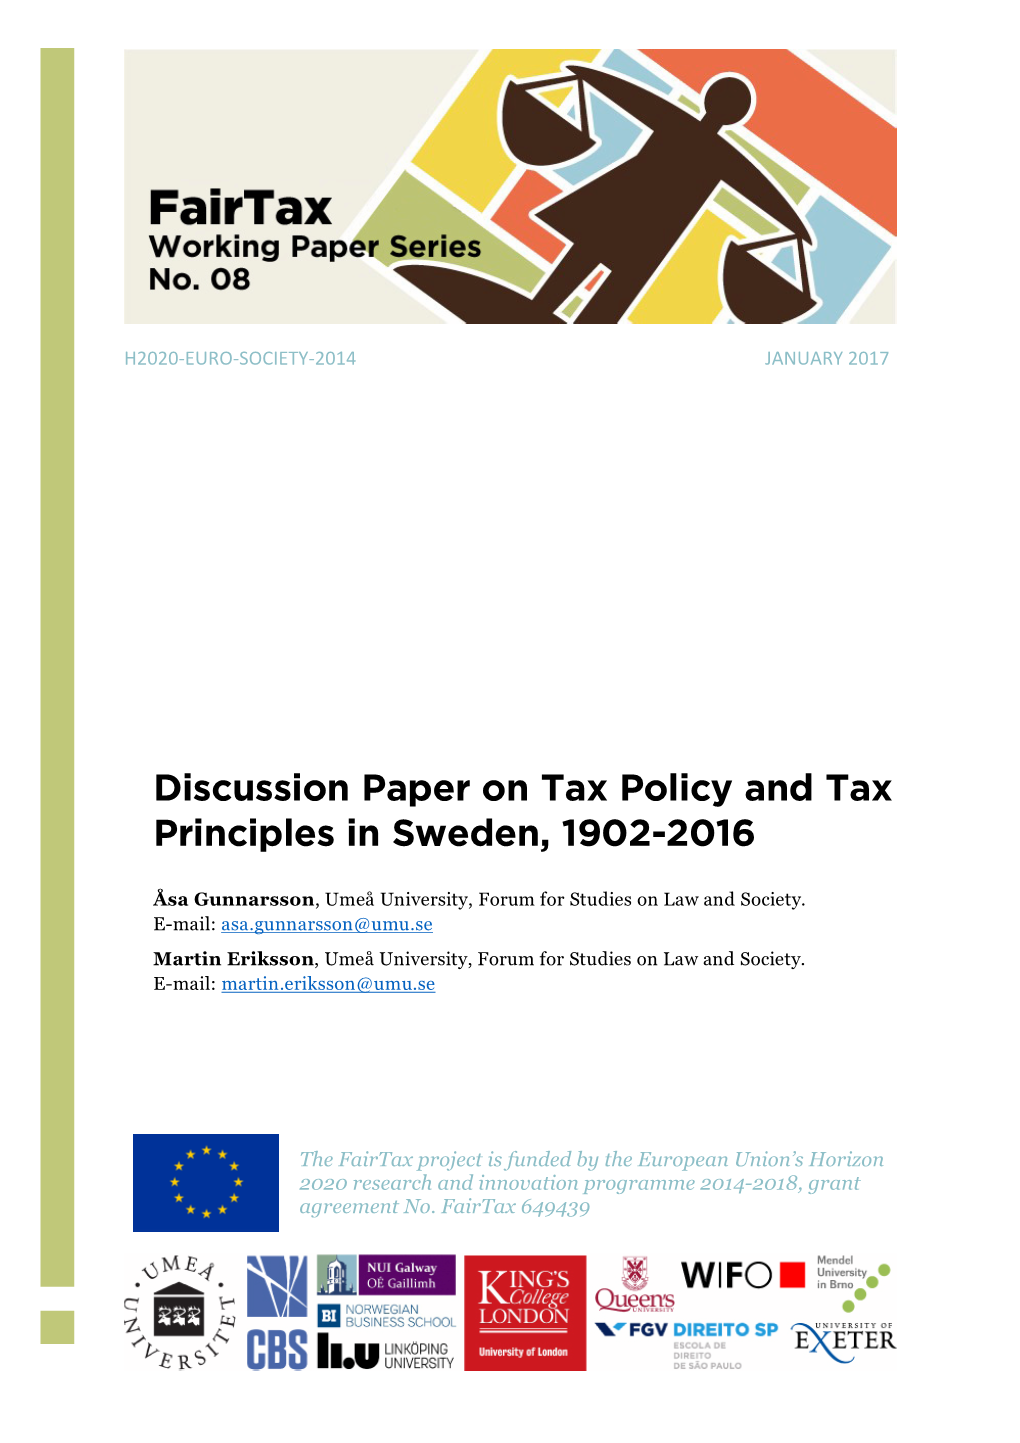 Discussion Paper on Tax Policy and Tax Principles in Sweden, 1902-2016